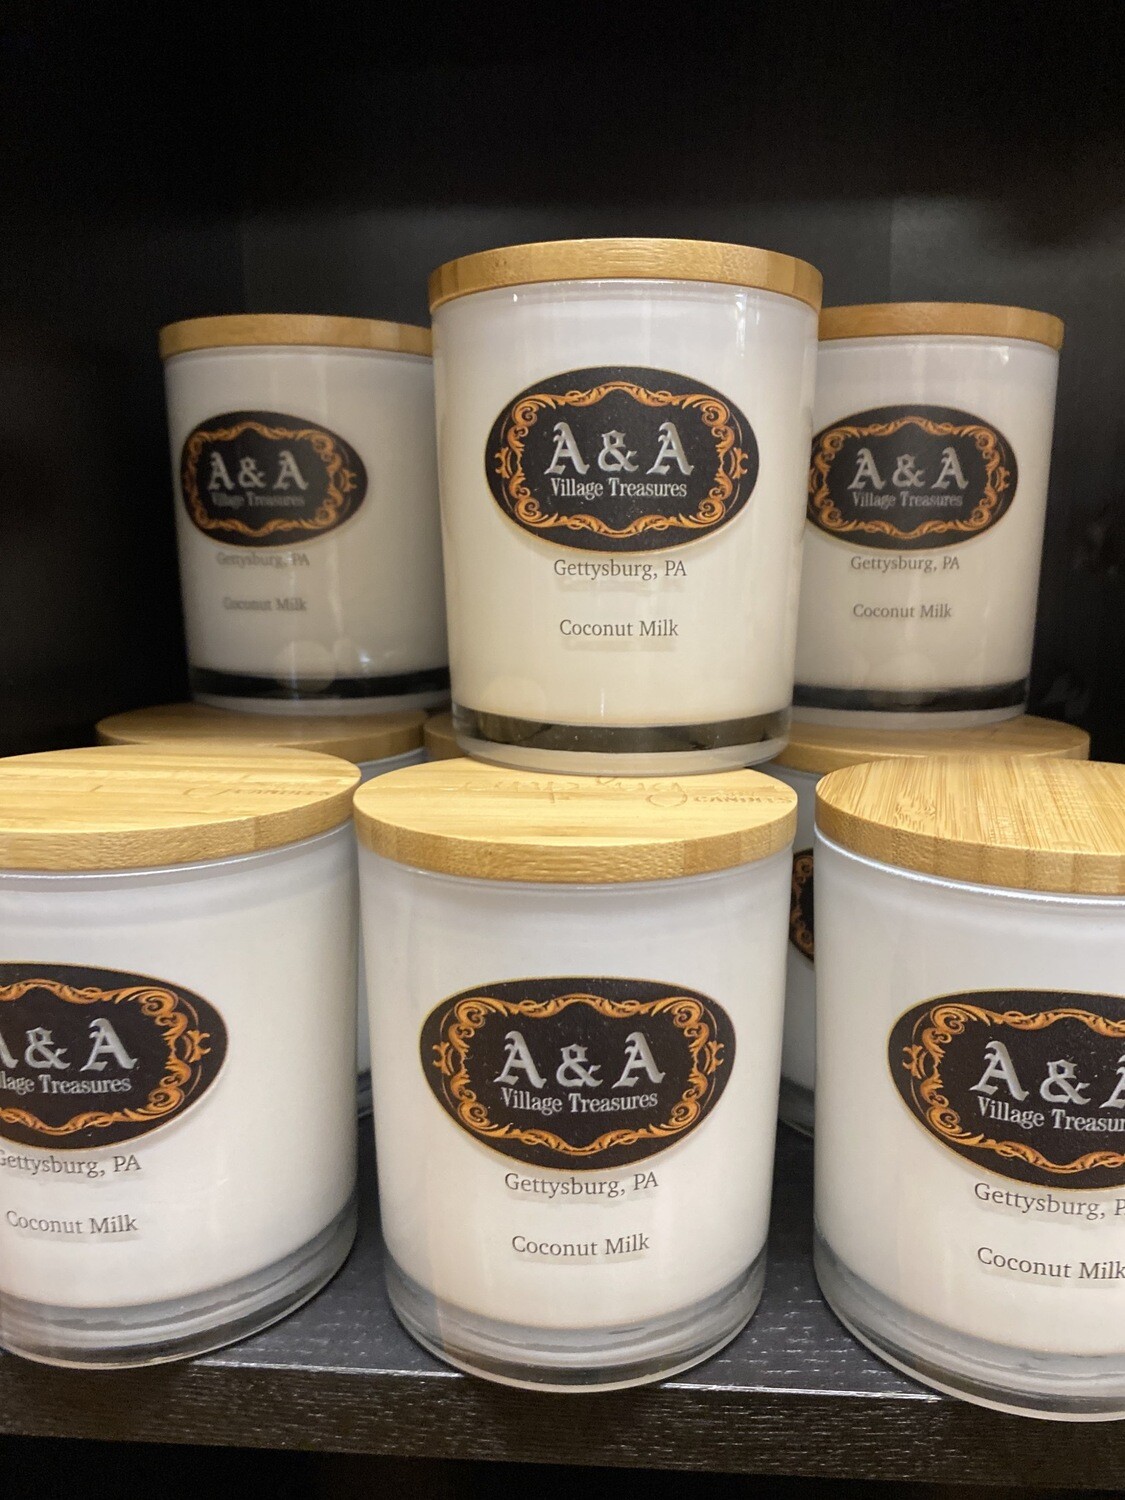 A&A Signature Gettysburg, PA Candle Coconut Milk Scent 100% Soy Made In USA 11.5 oz